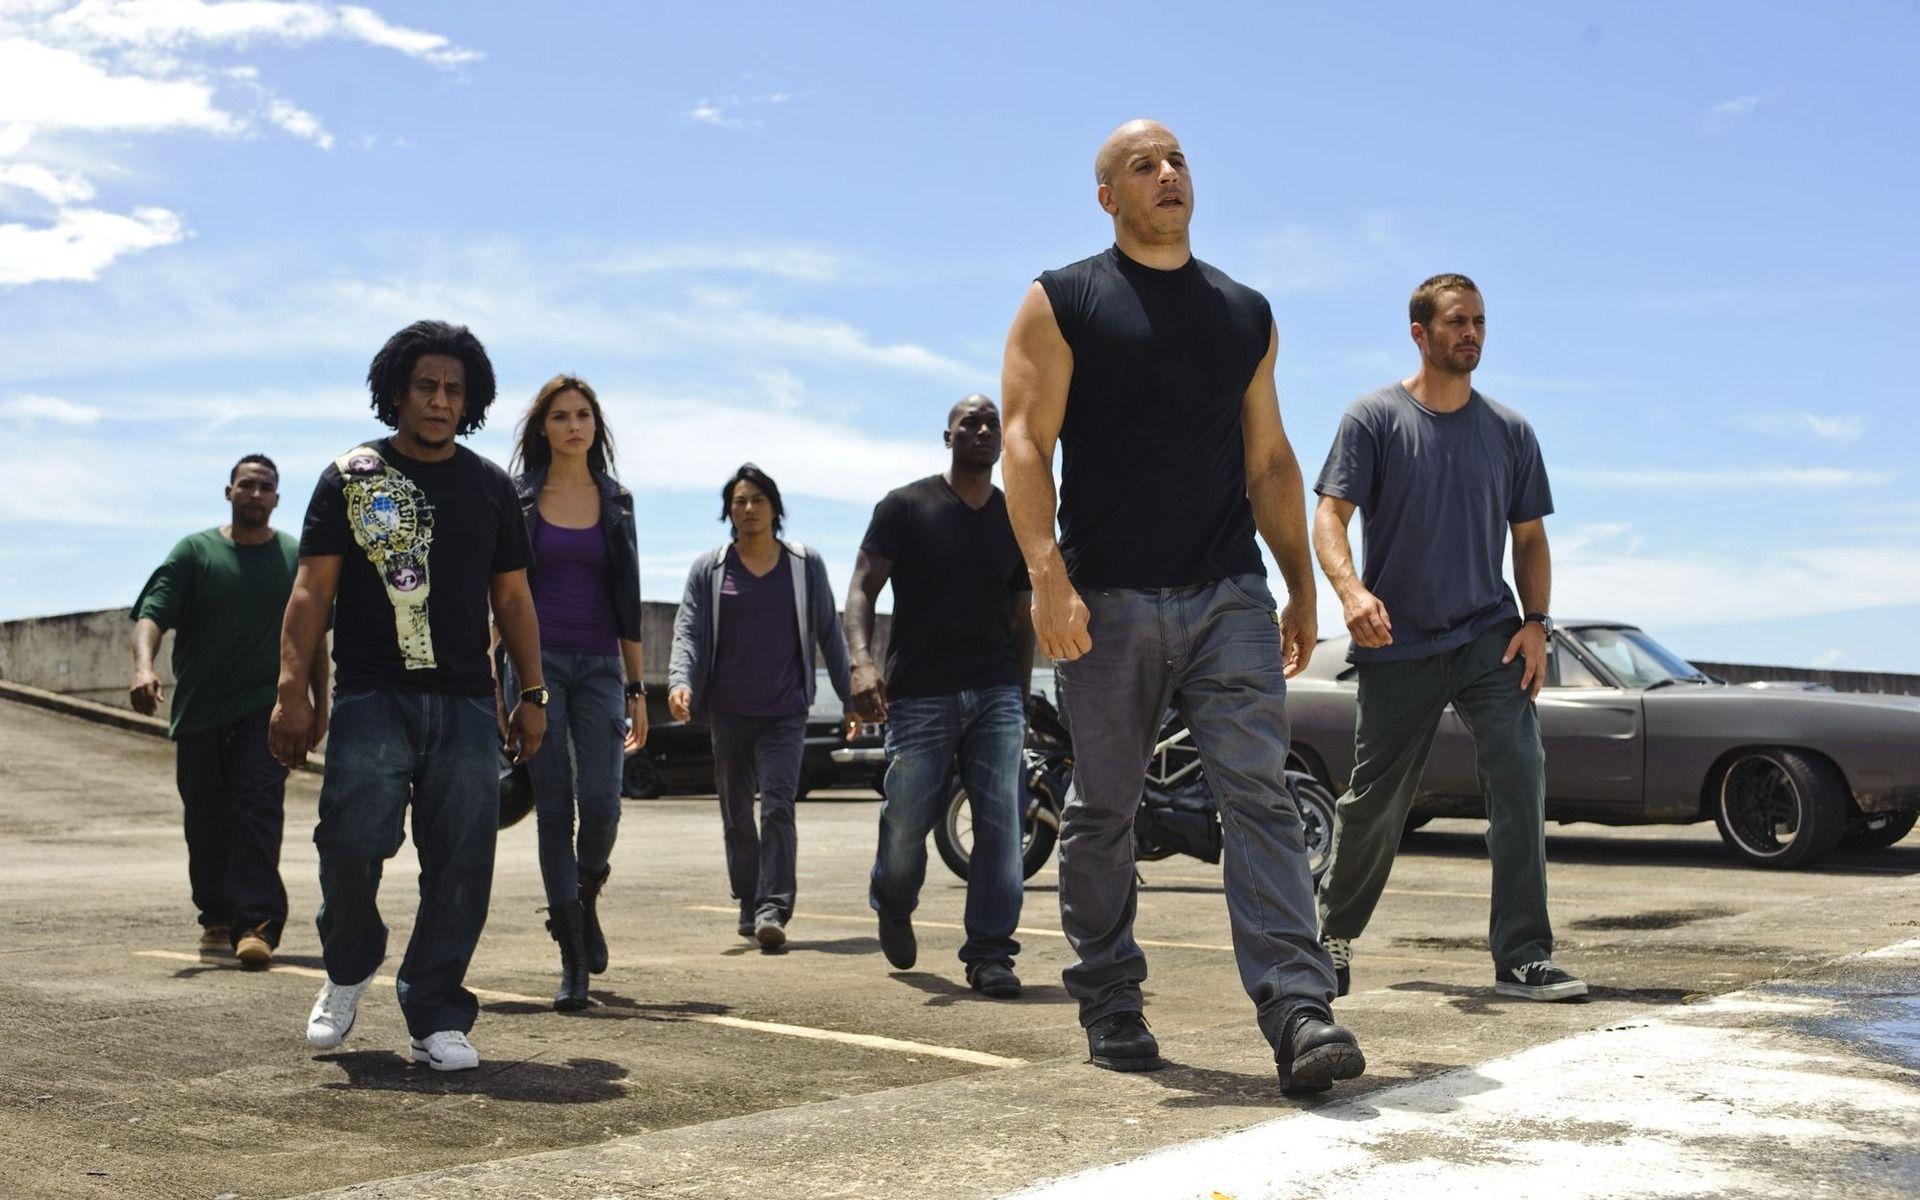 Vin Diesel in Fast and Furious widescreen wallpaper. Wide